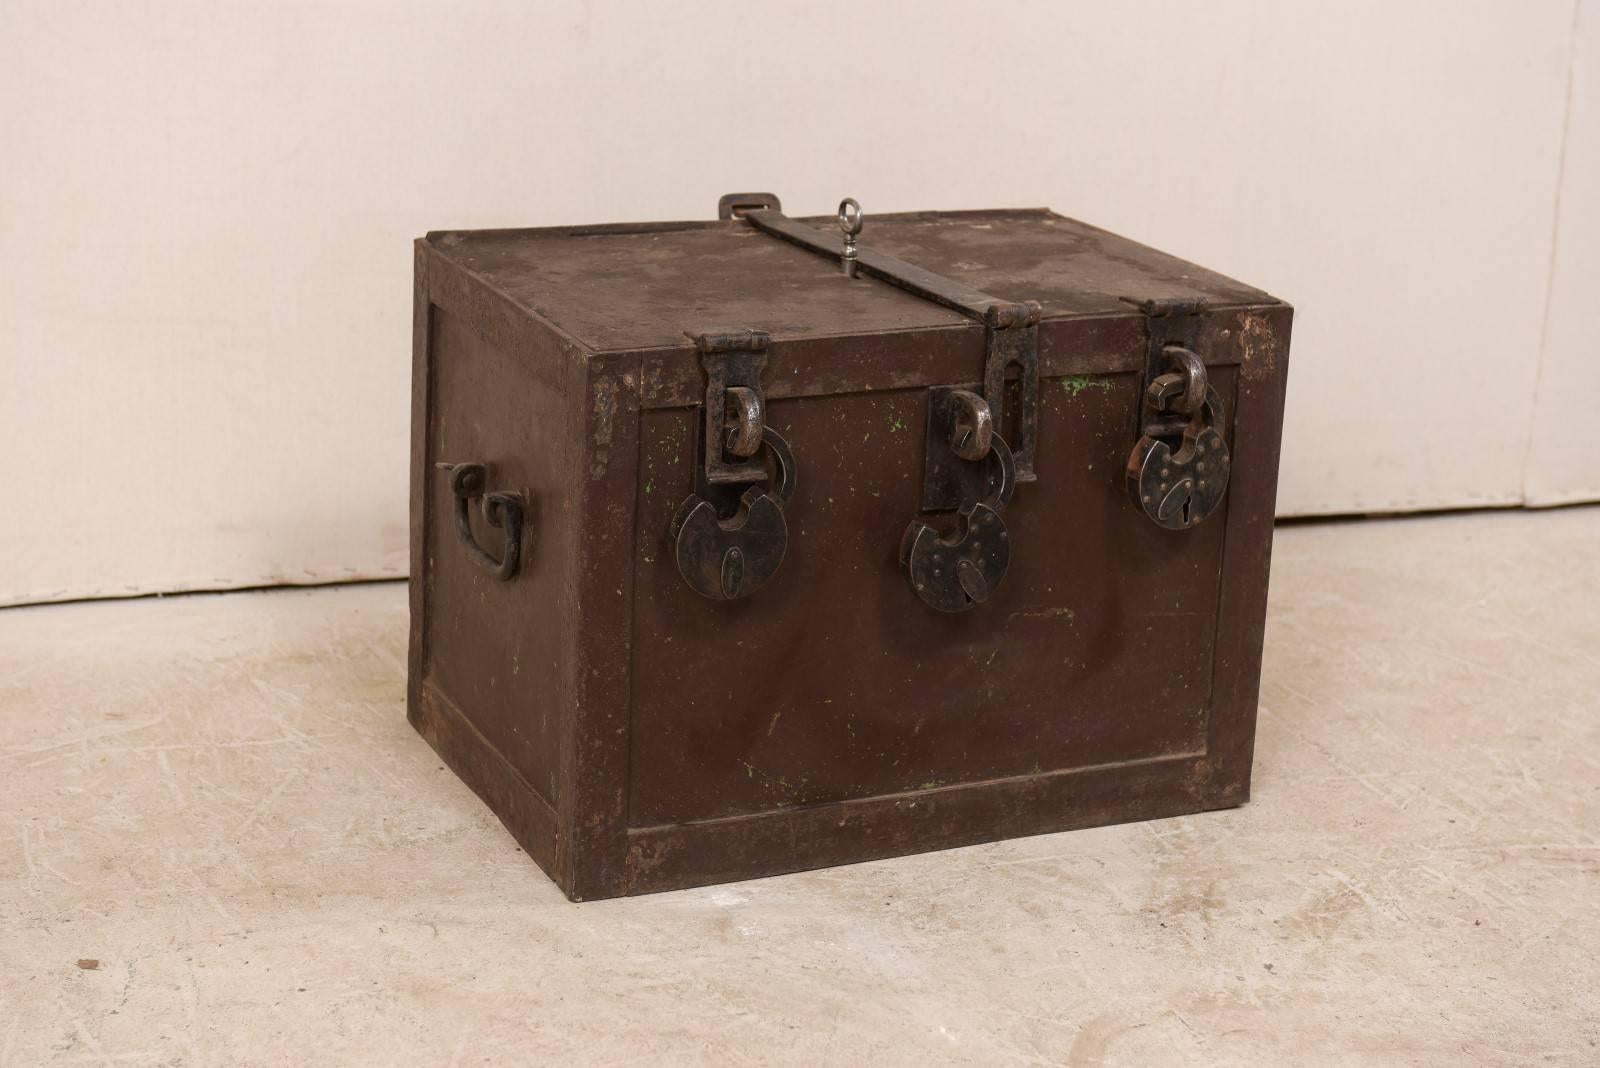 A Swedish iron safe from the 19th century. This antique Swedish rectangular-shaped iron safe features three chunky padlocks which dangle open from the front top (note that these cannot be locked at this time as they have no working key) with lid